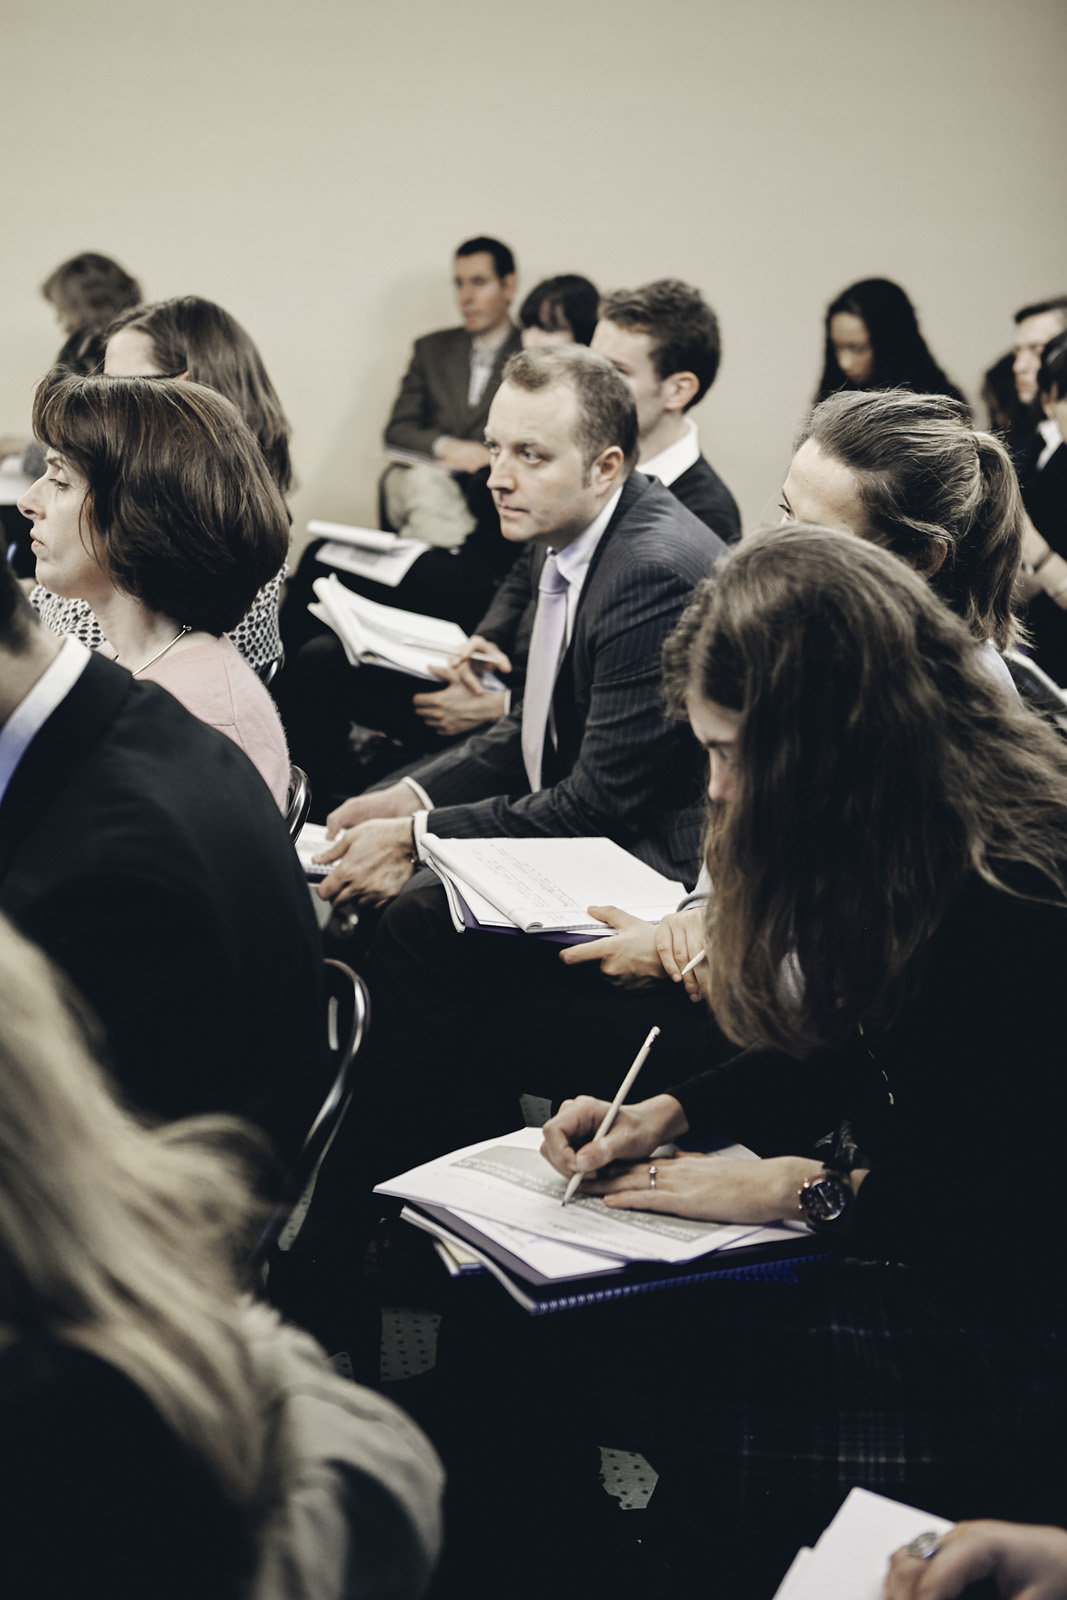 Concurrences Journal Paris : lawyers talks and seminars in Paris. Giovanni Ambrosio Corporate photography